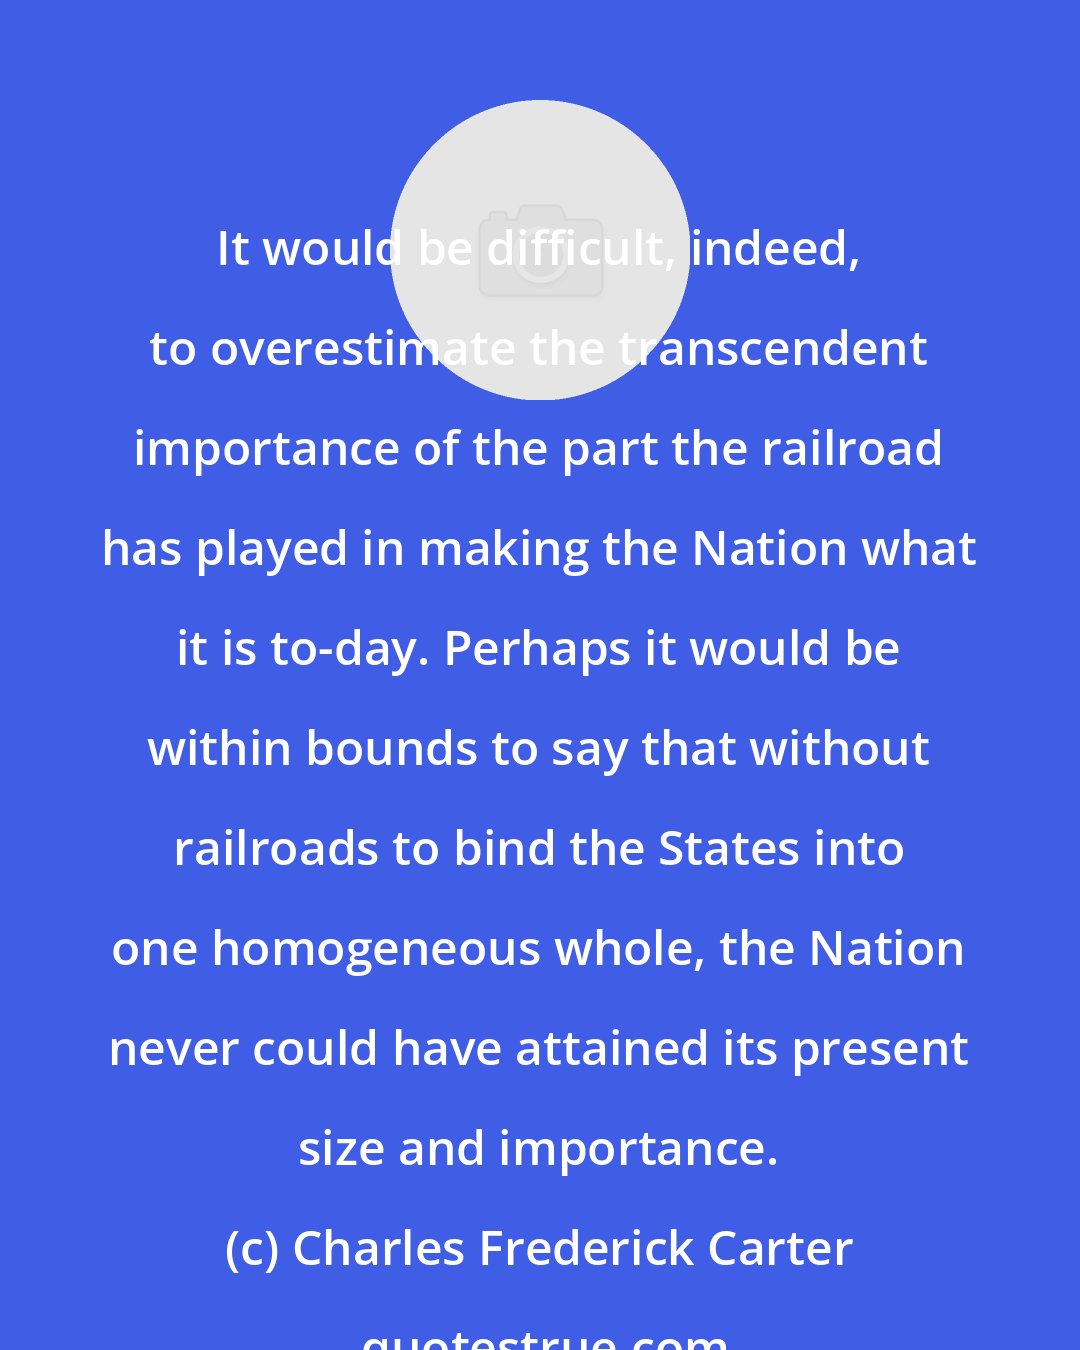 Charles Frederick Carter: It would be difficult, indeed, to overestimate the transcendent importance of the part the railroad has played in making the Nation what it is to-day. Perhaps it would be within bounds to say that without railroads to bind the States into one homogeneous whole, the Nation never could have attained its present size and importance.